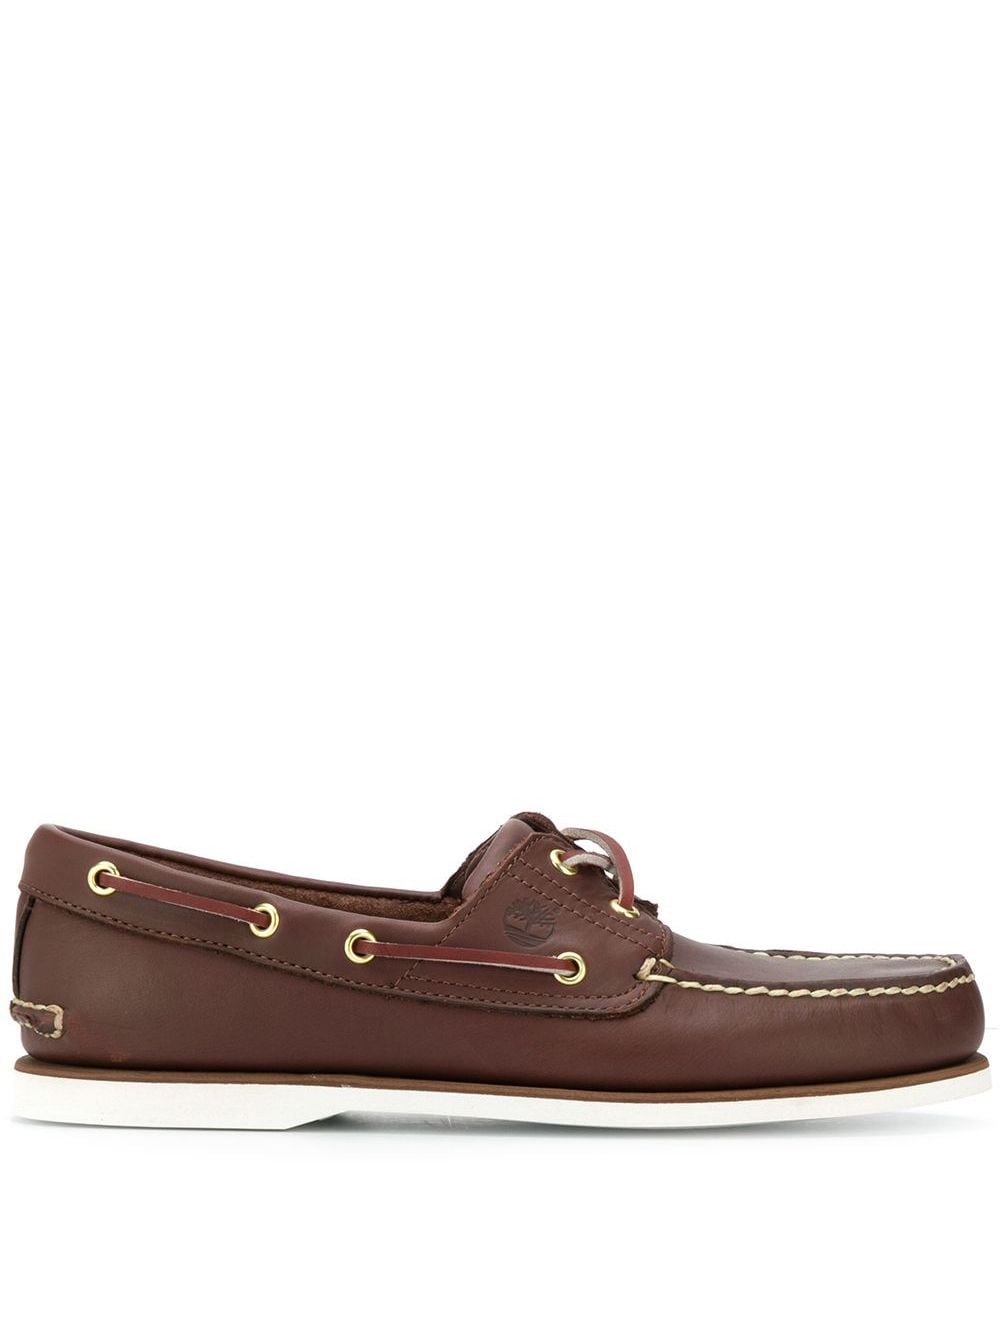 Timberland classic boat shoes - Brown von Timberland